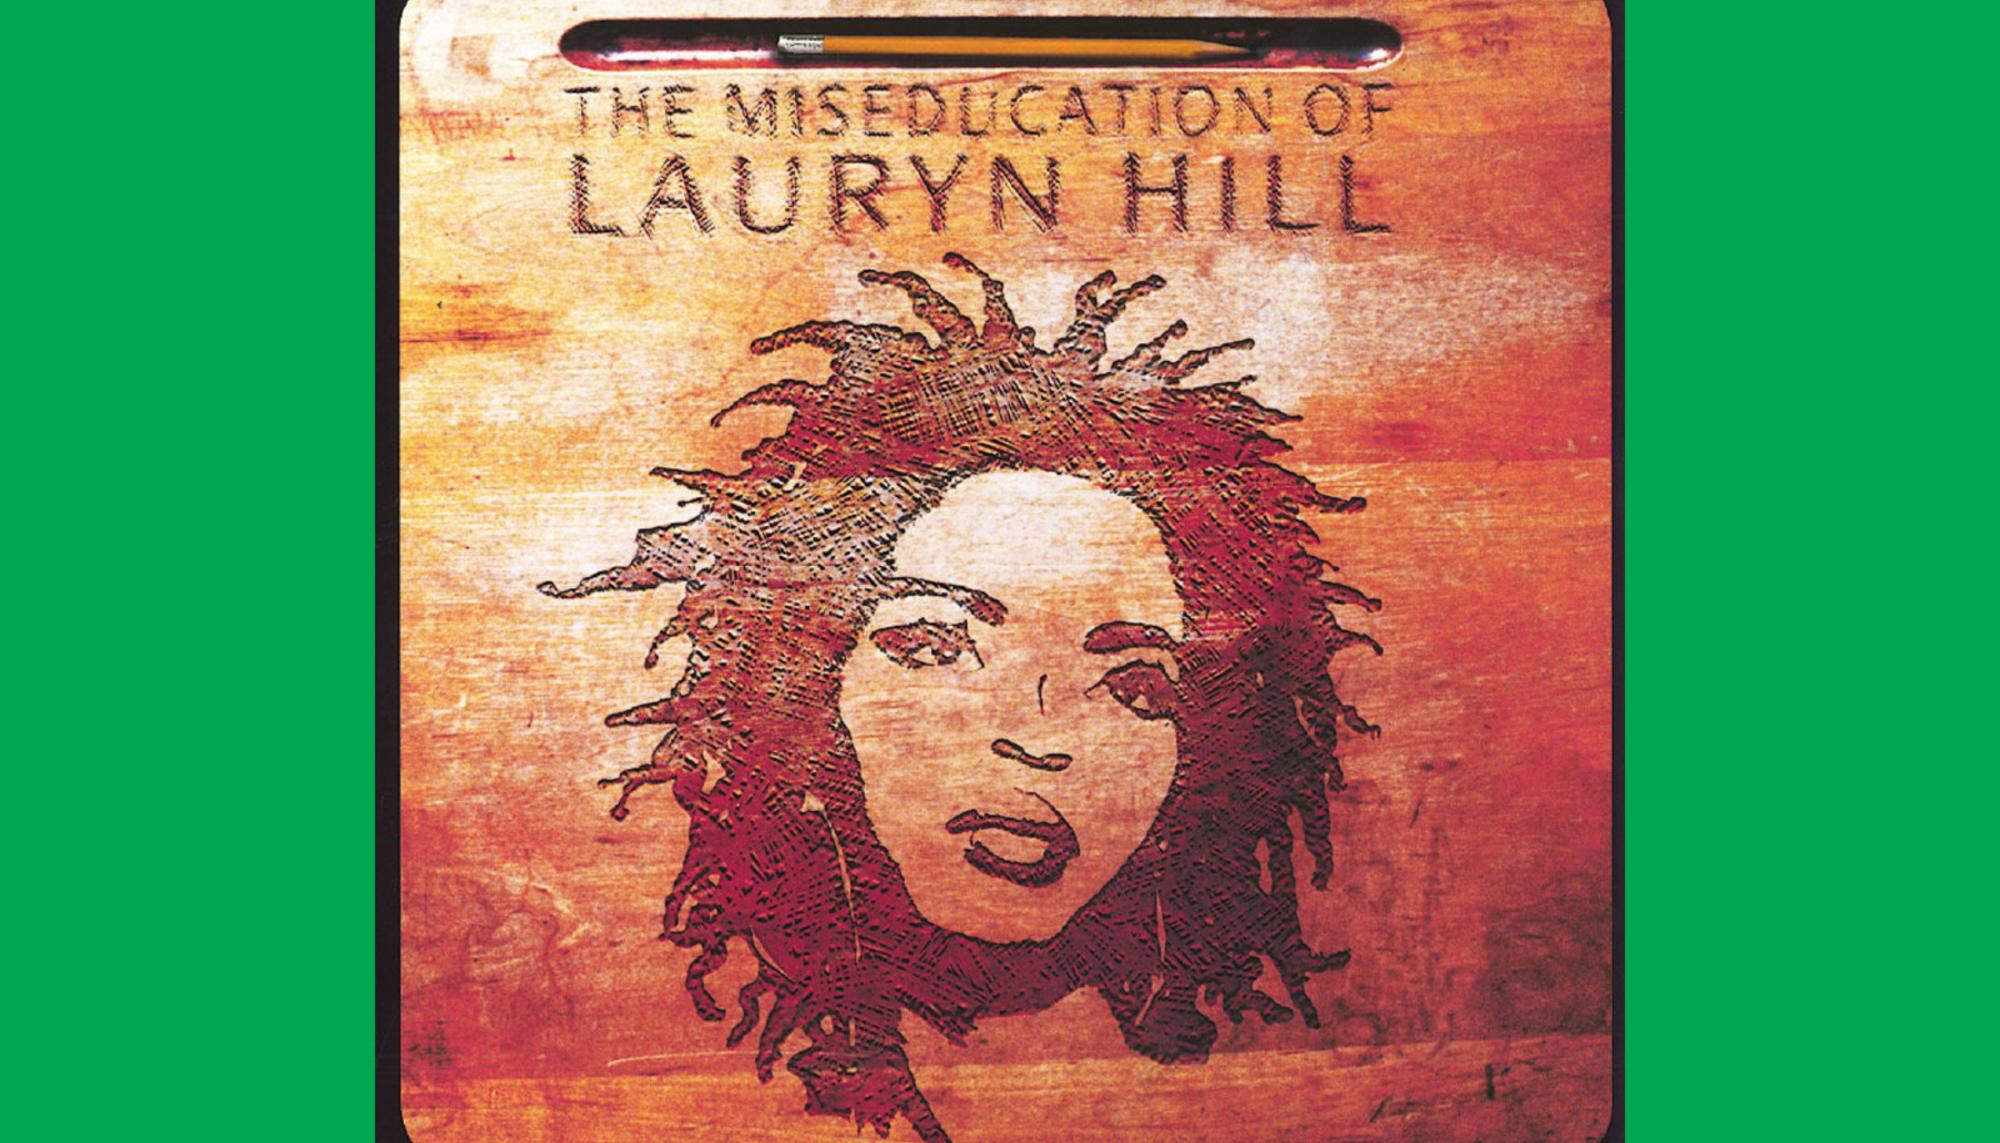 The Miseducation of Lauryn Hill.